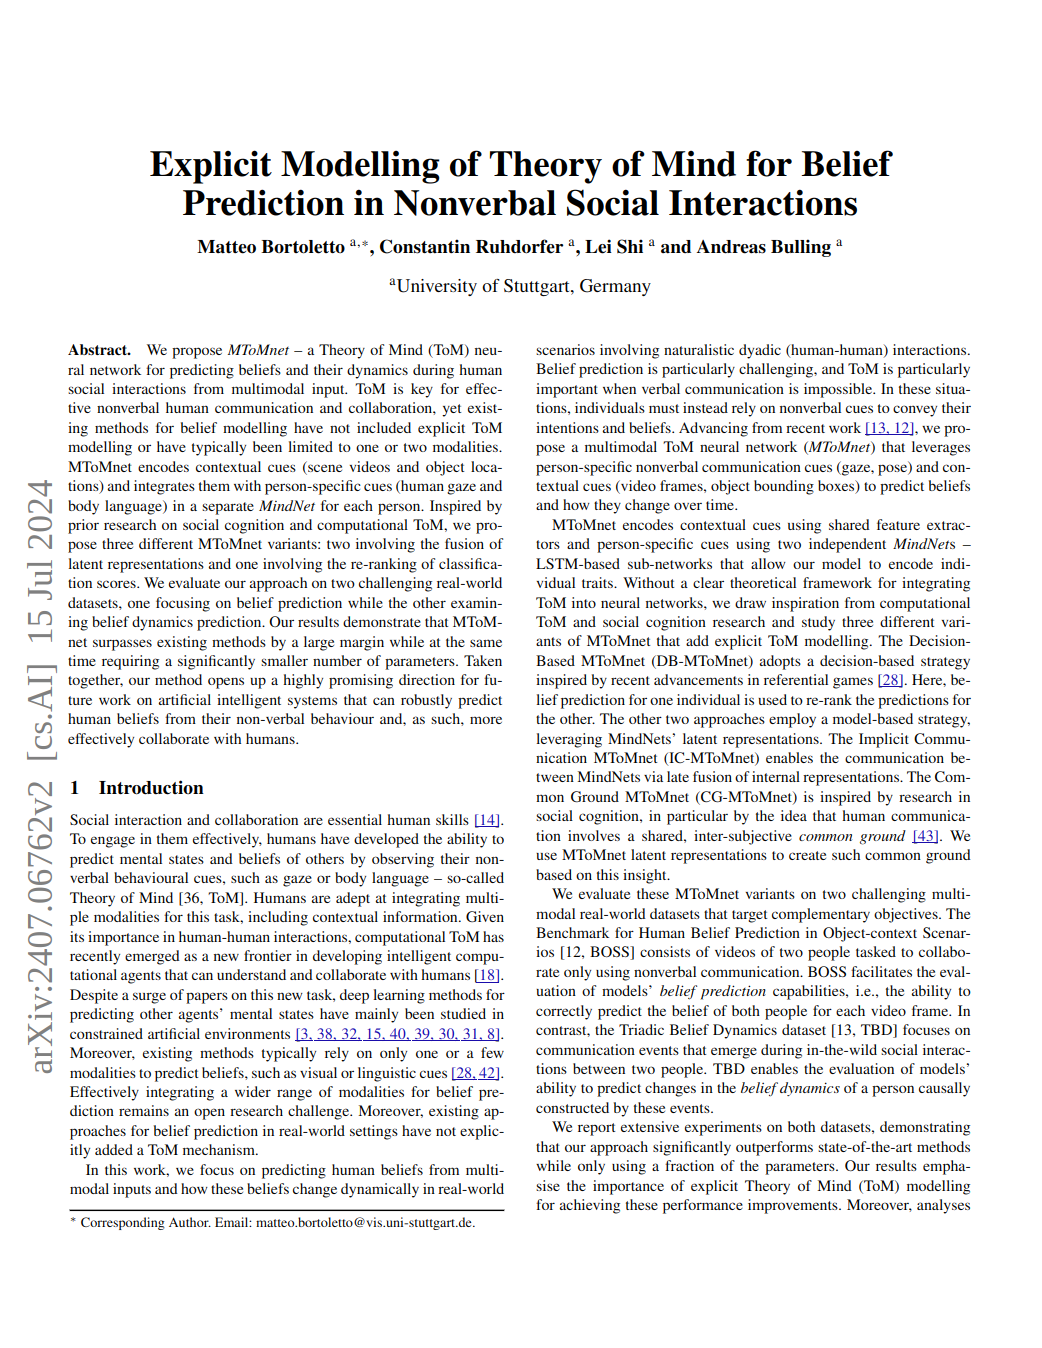 Explicit Modelling of Theory of Mind for Belief Prediction in Nonverbal Social Interactions